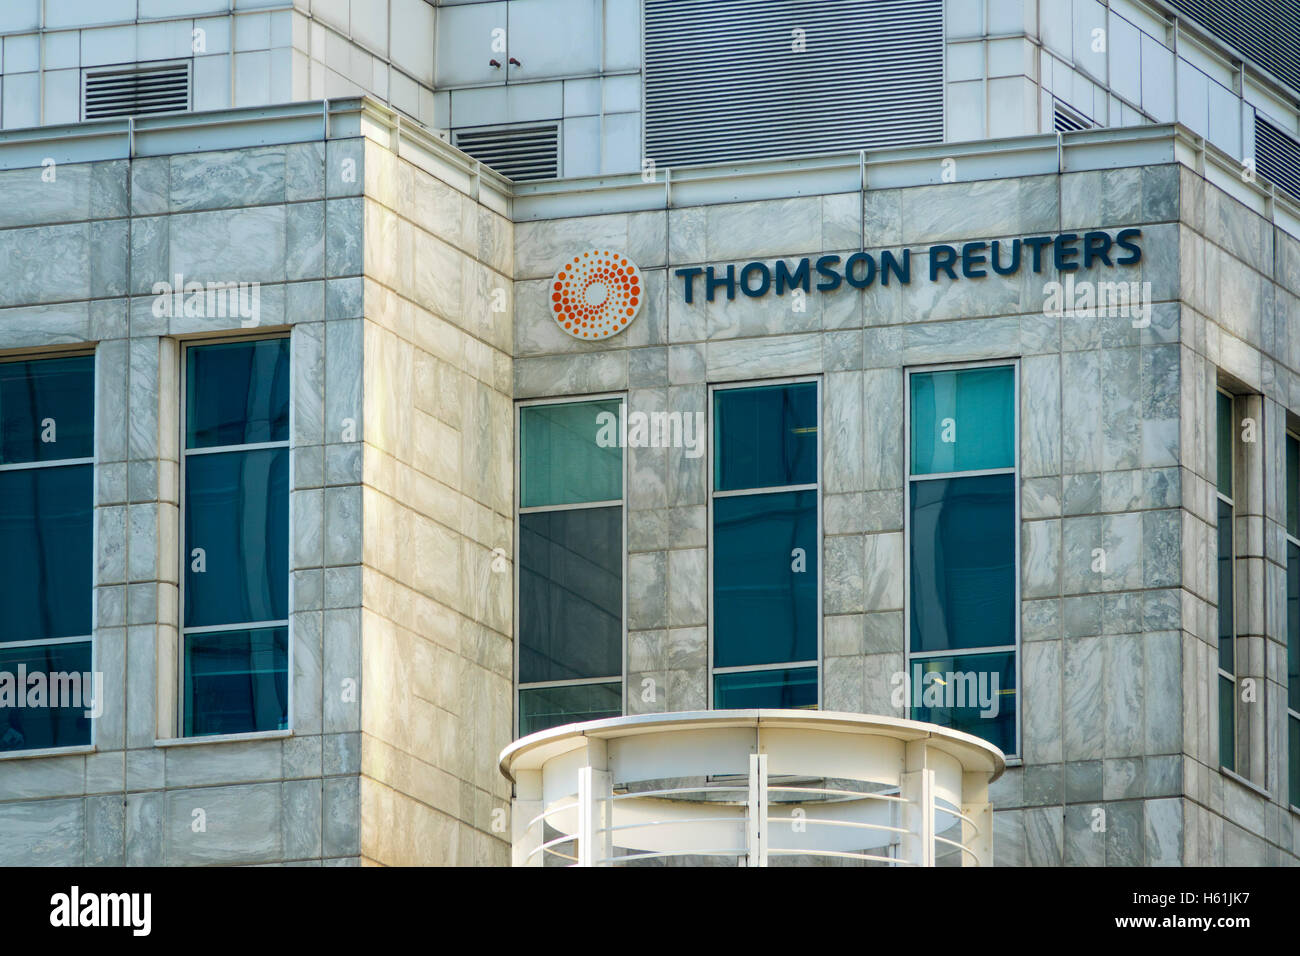 Thomson Reuters Building at Canary Wharf Stock Photo